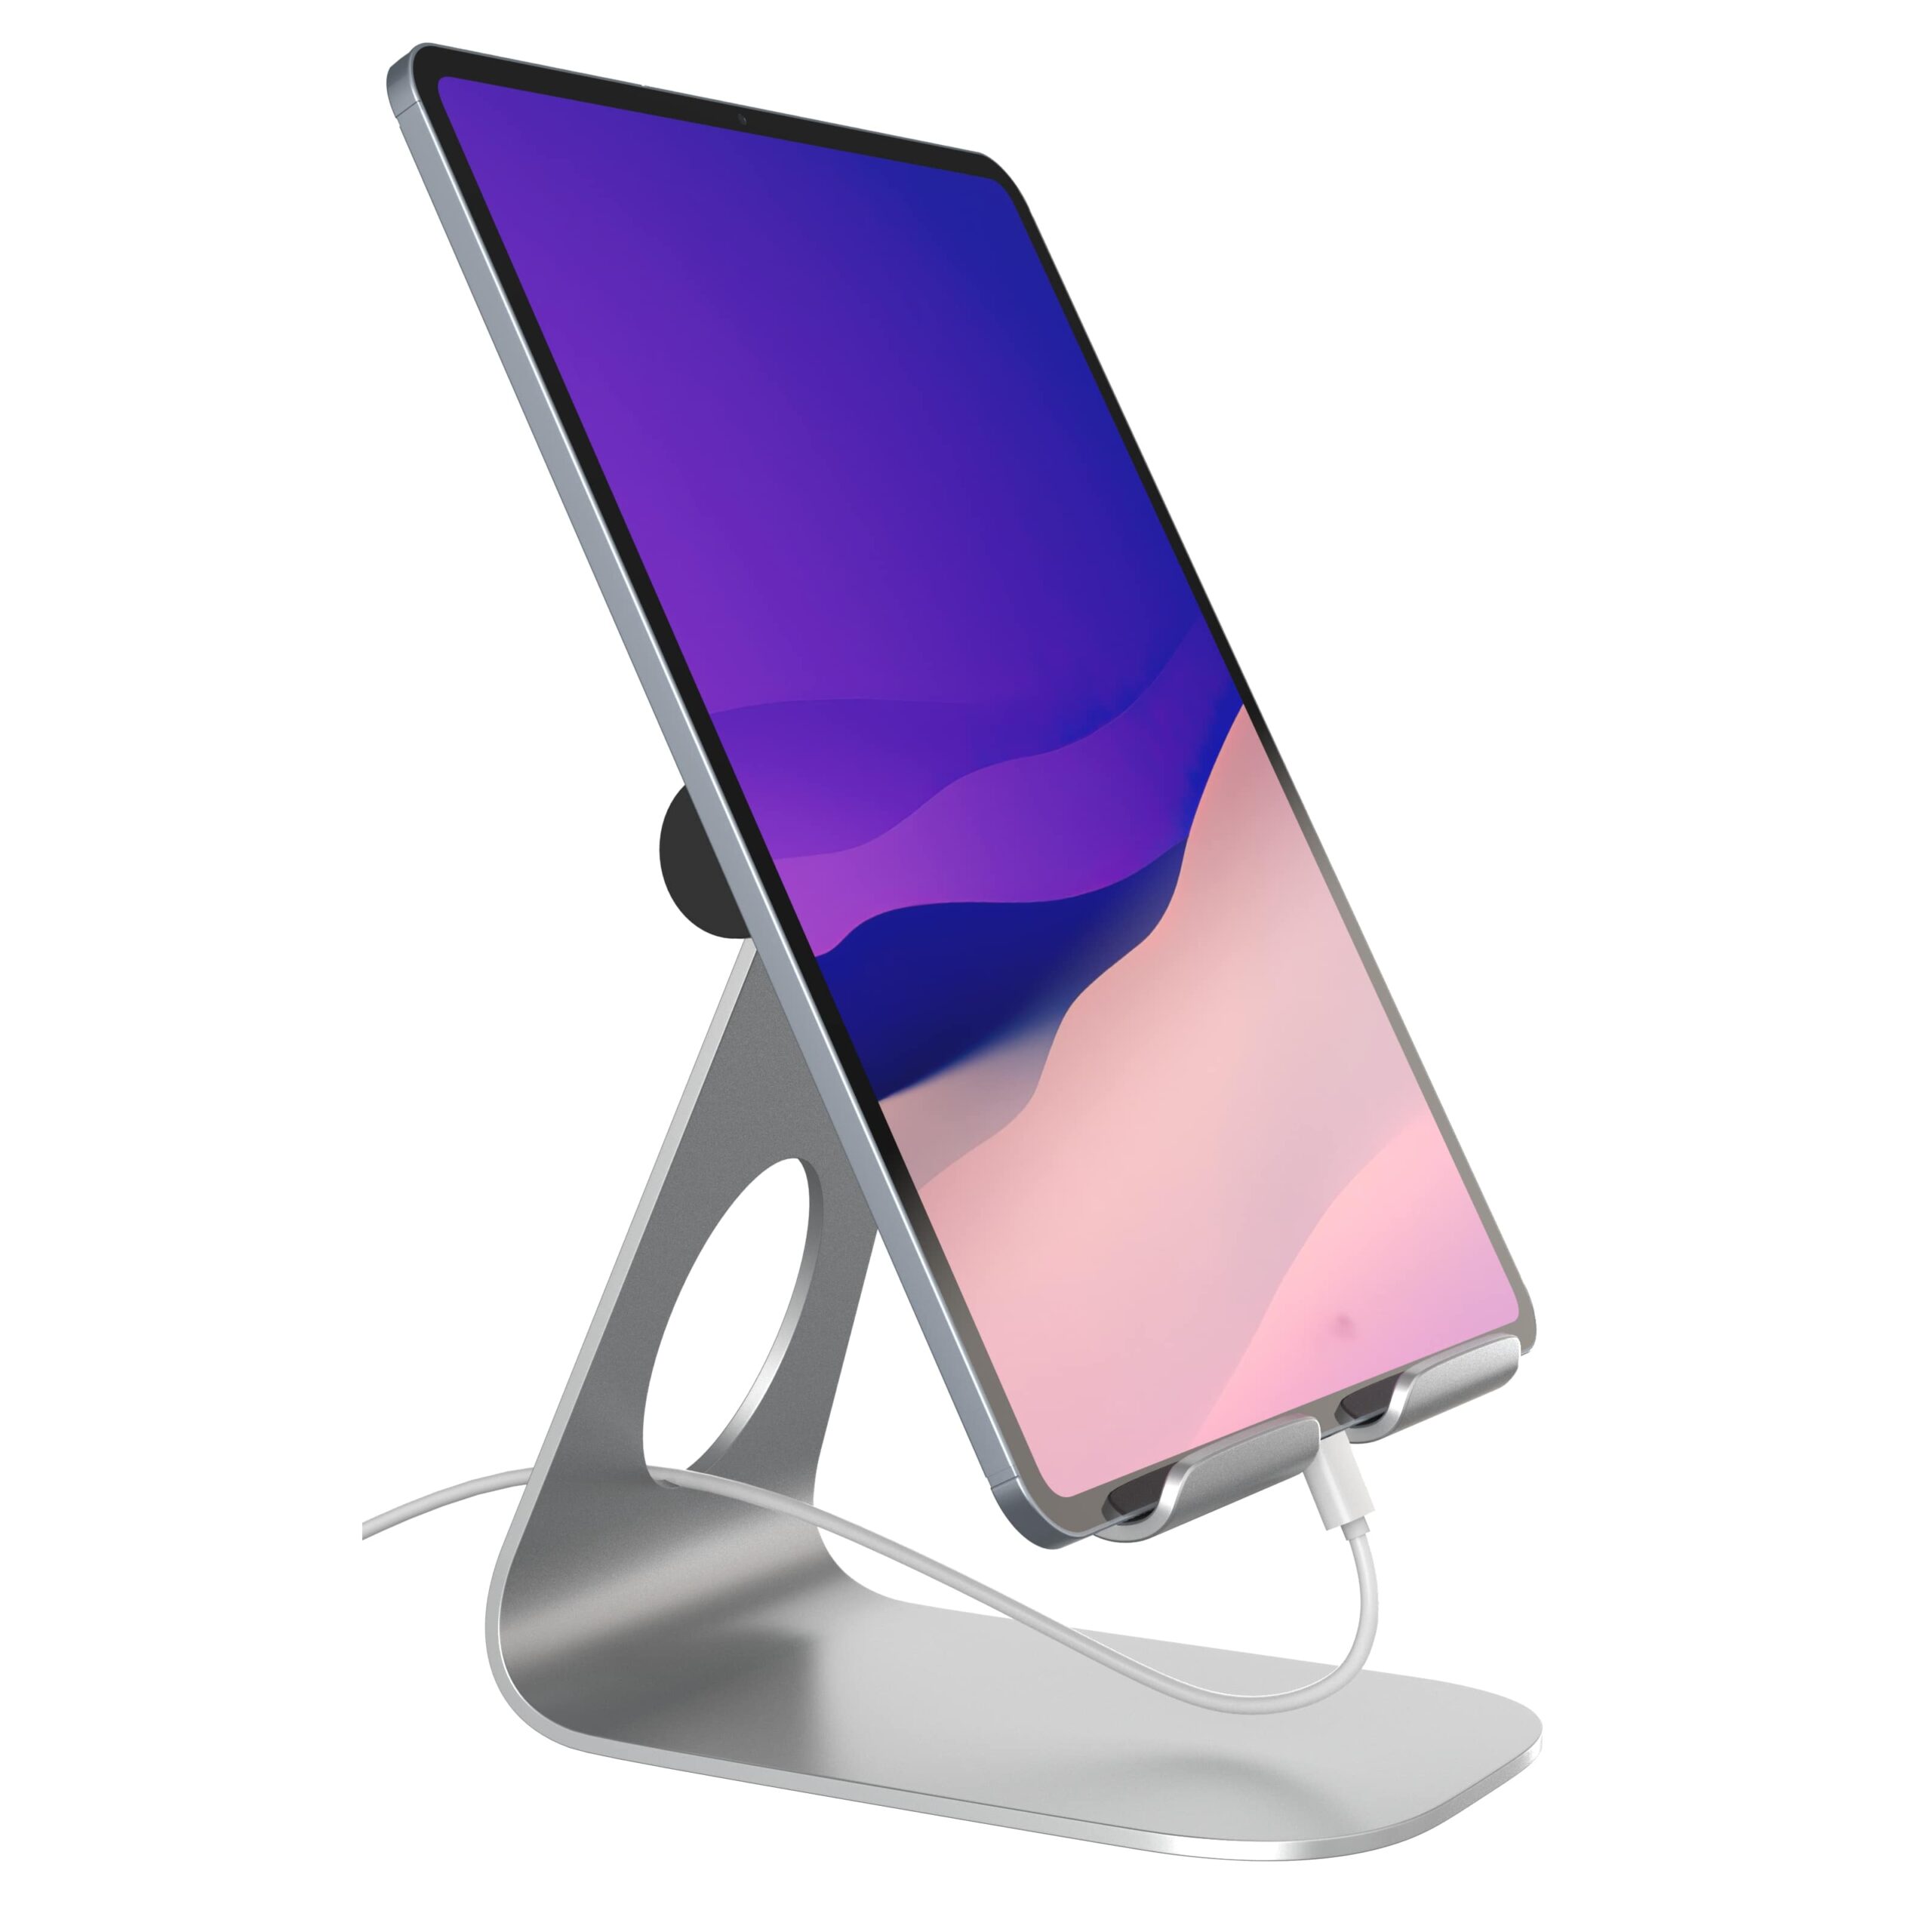 tablet stand and mobile holder